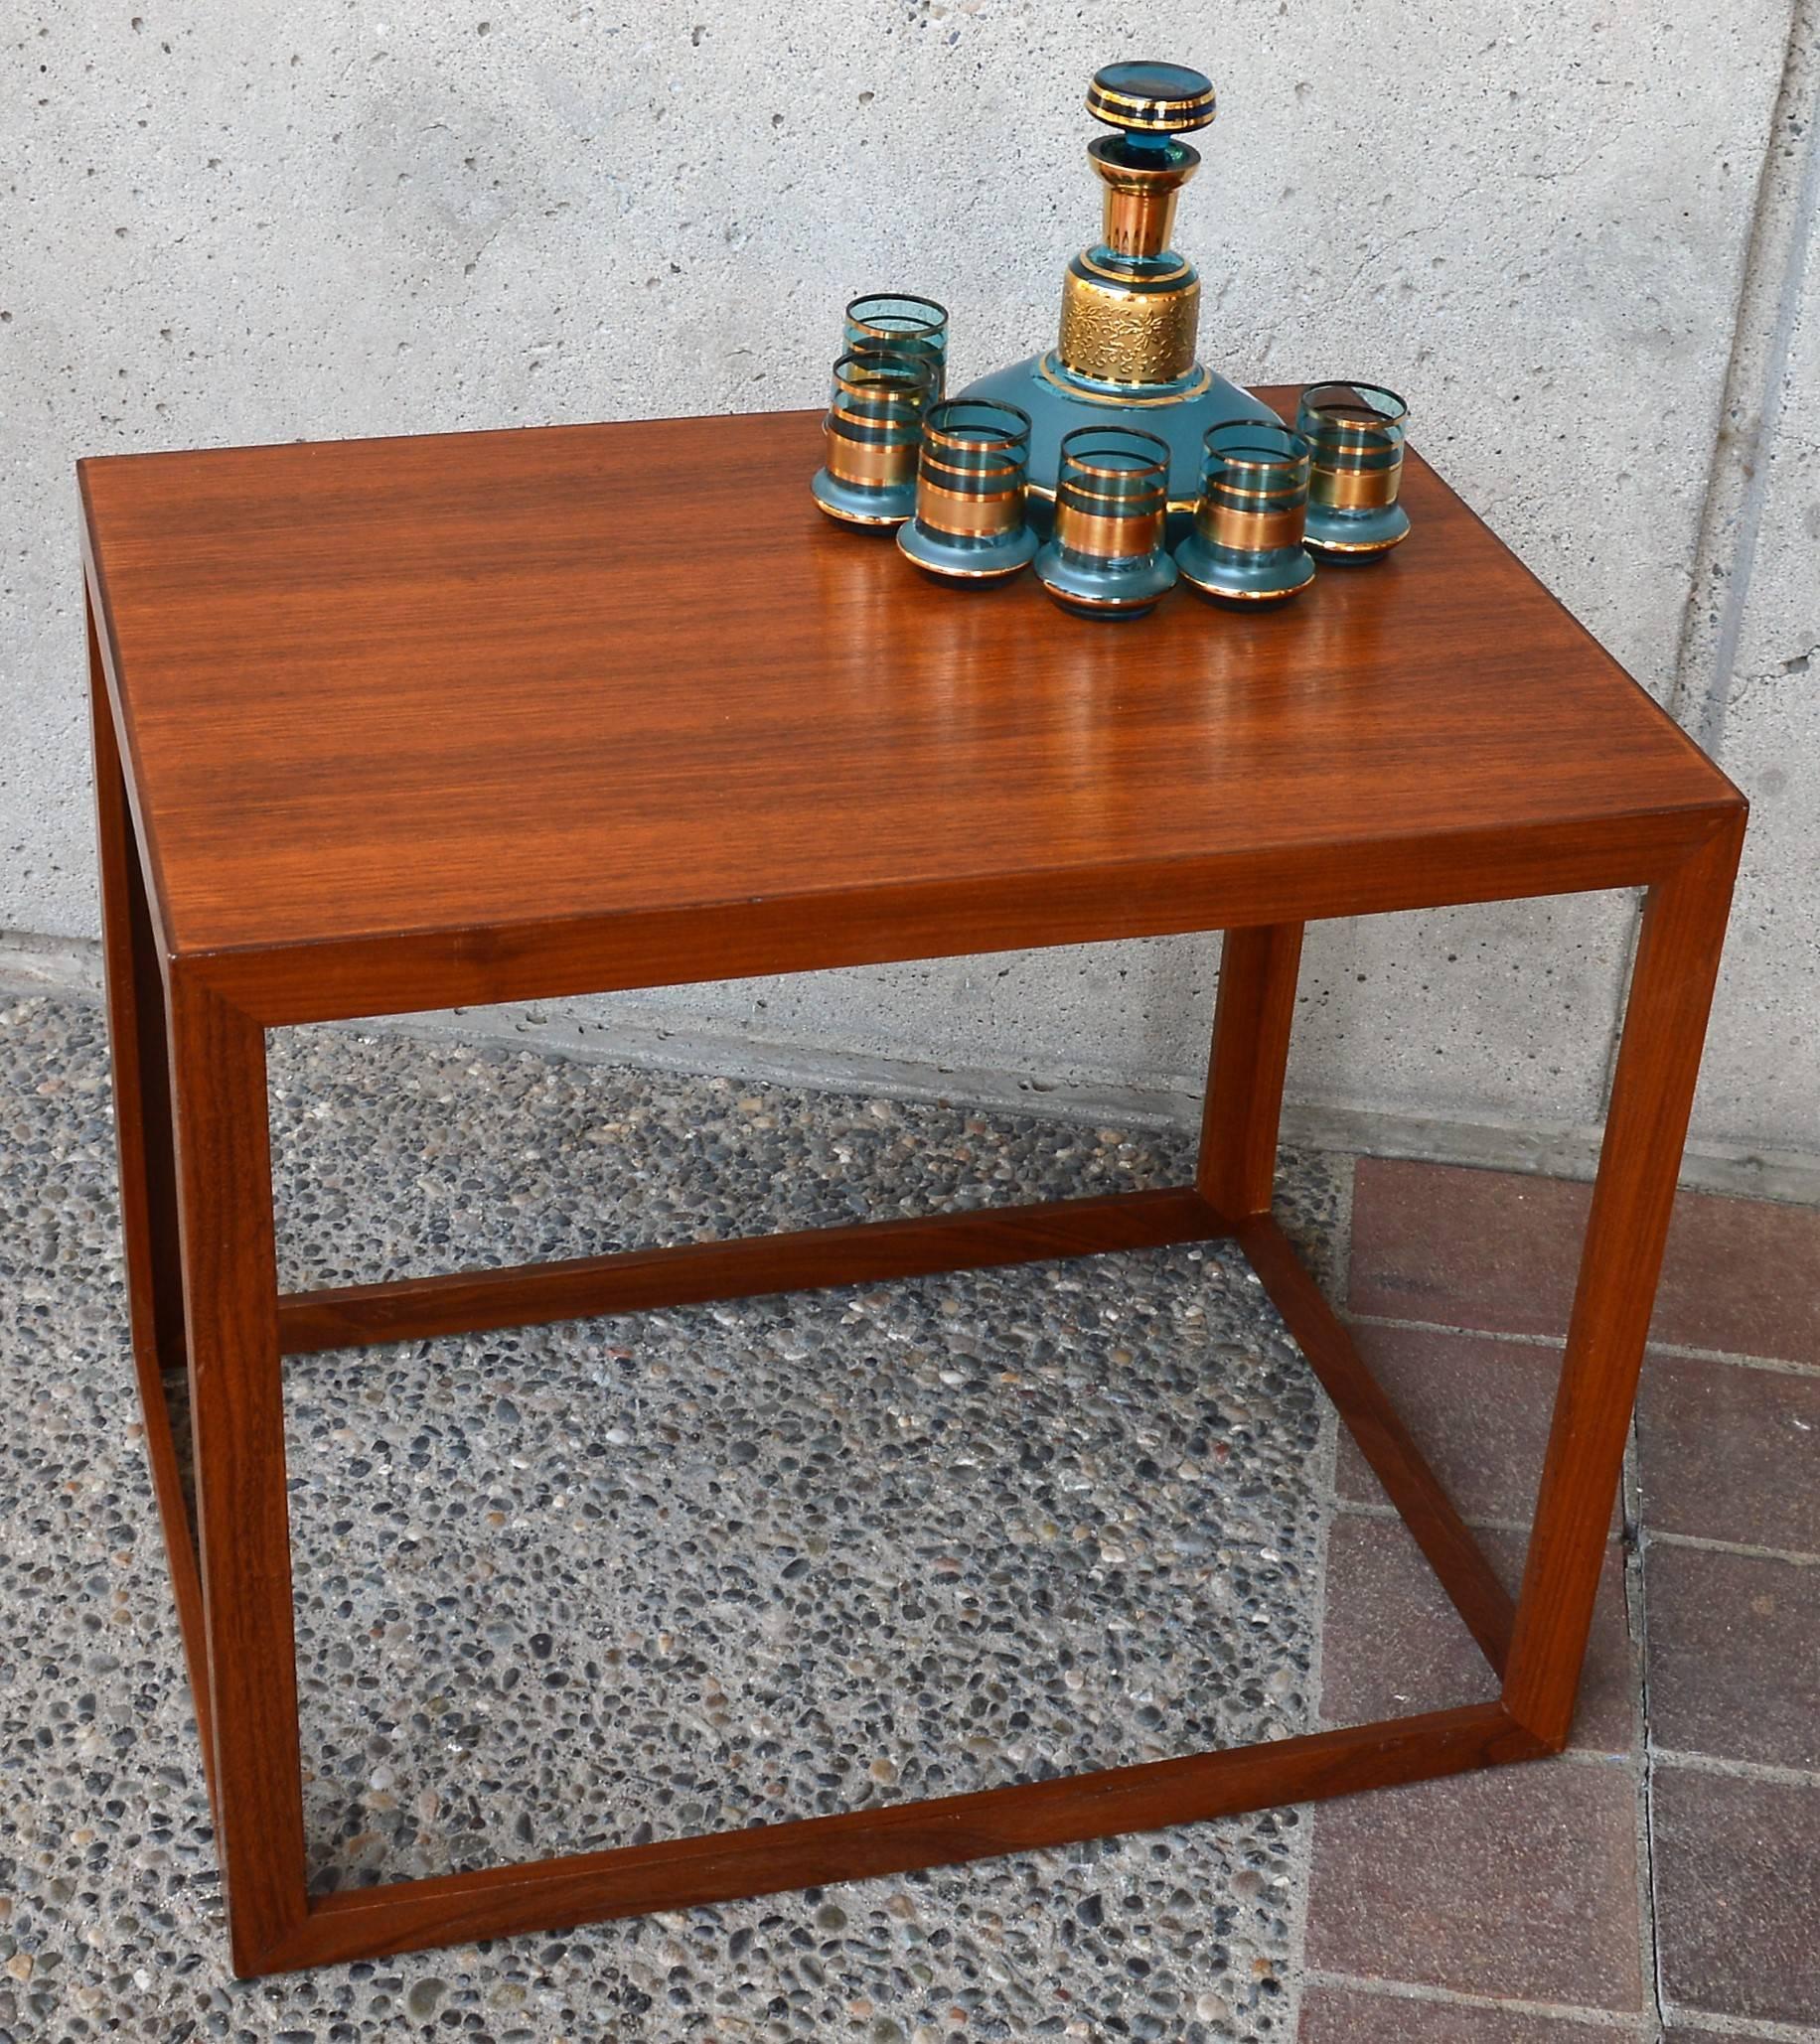 Mid-20th Century Danish Modern Teak and Mahogany Cube Side Table or Small Coffee Table